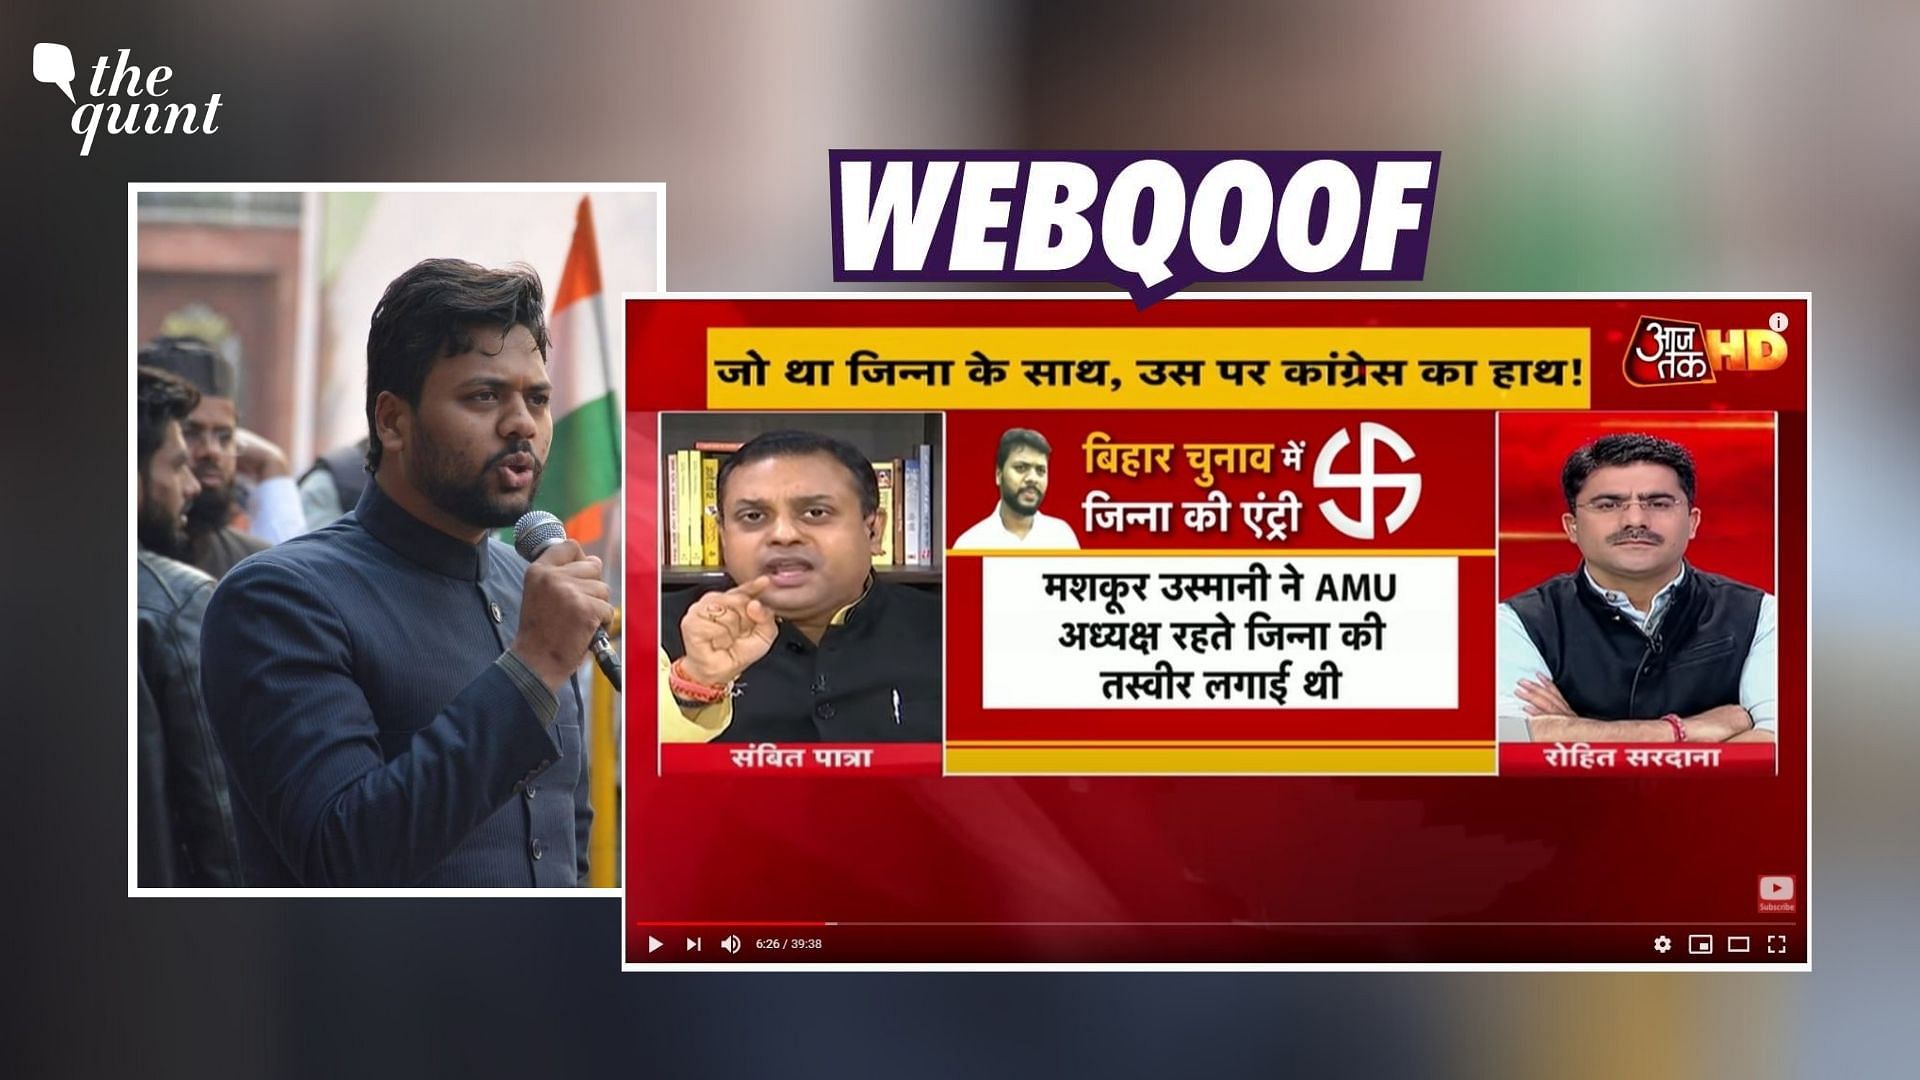 Hindi news channel <a href="https://www.youtube.com/watch?v=cS3kmAD8DVg&amp;feature=youtu.be&amp;t=385">AajTak</a>, accused Usmani of being a “Jinnah supporter” and claimed that in 2018 he installed a portrait of Muhammad Ali Jinnah at AMU.